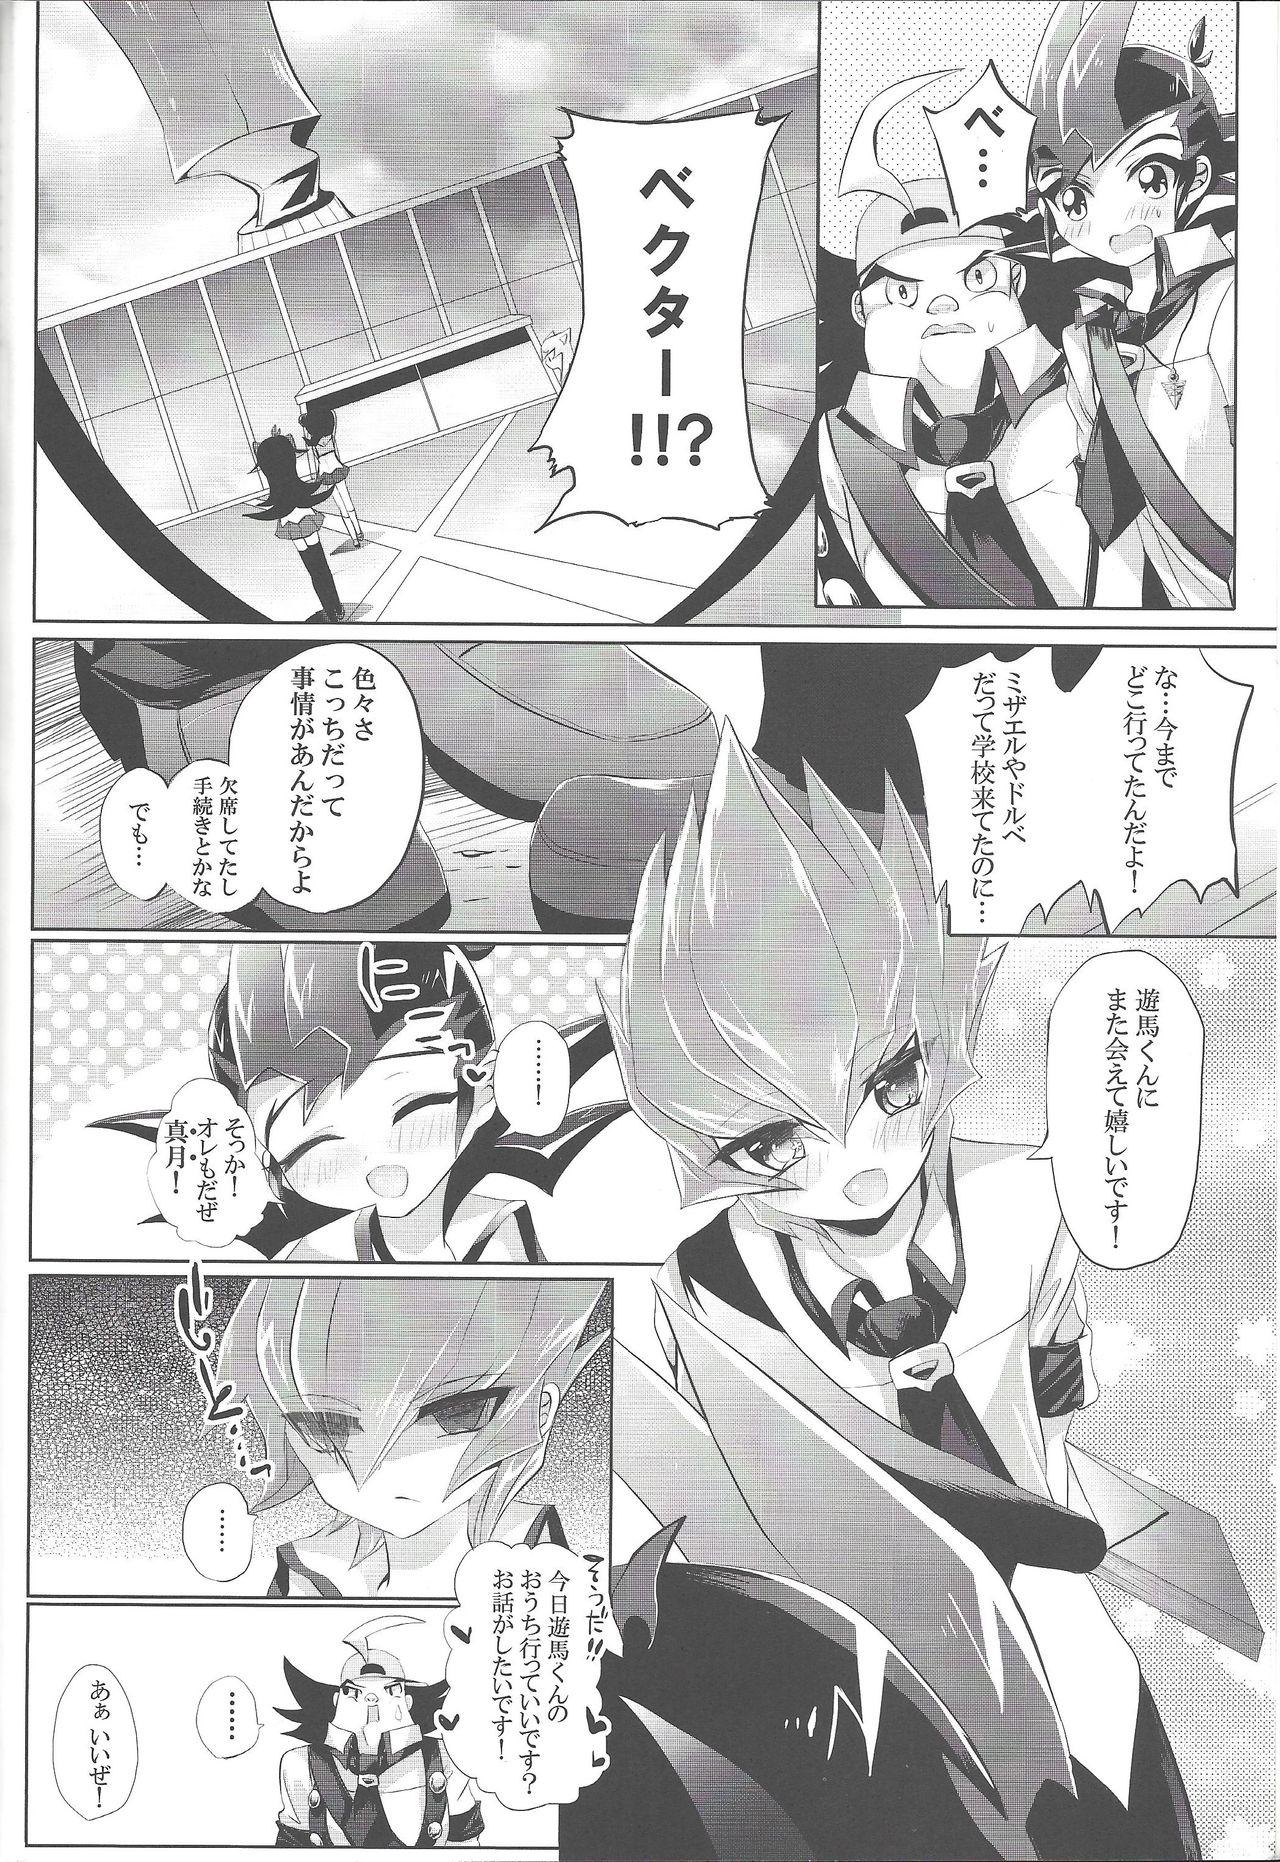 Cumload PARANOIA! - Yu-gi-oh zexal Unshaved - Page 3